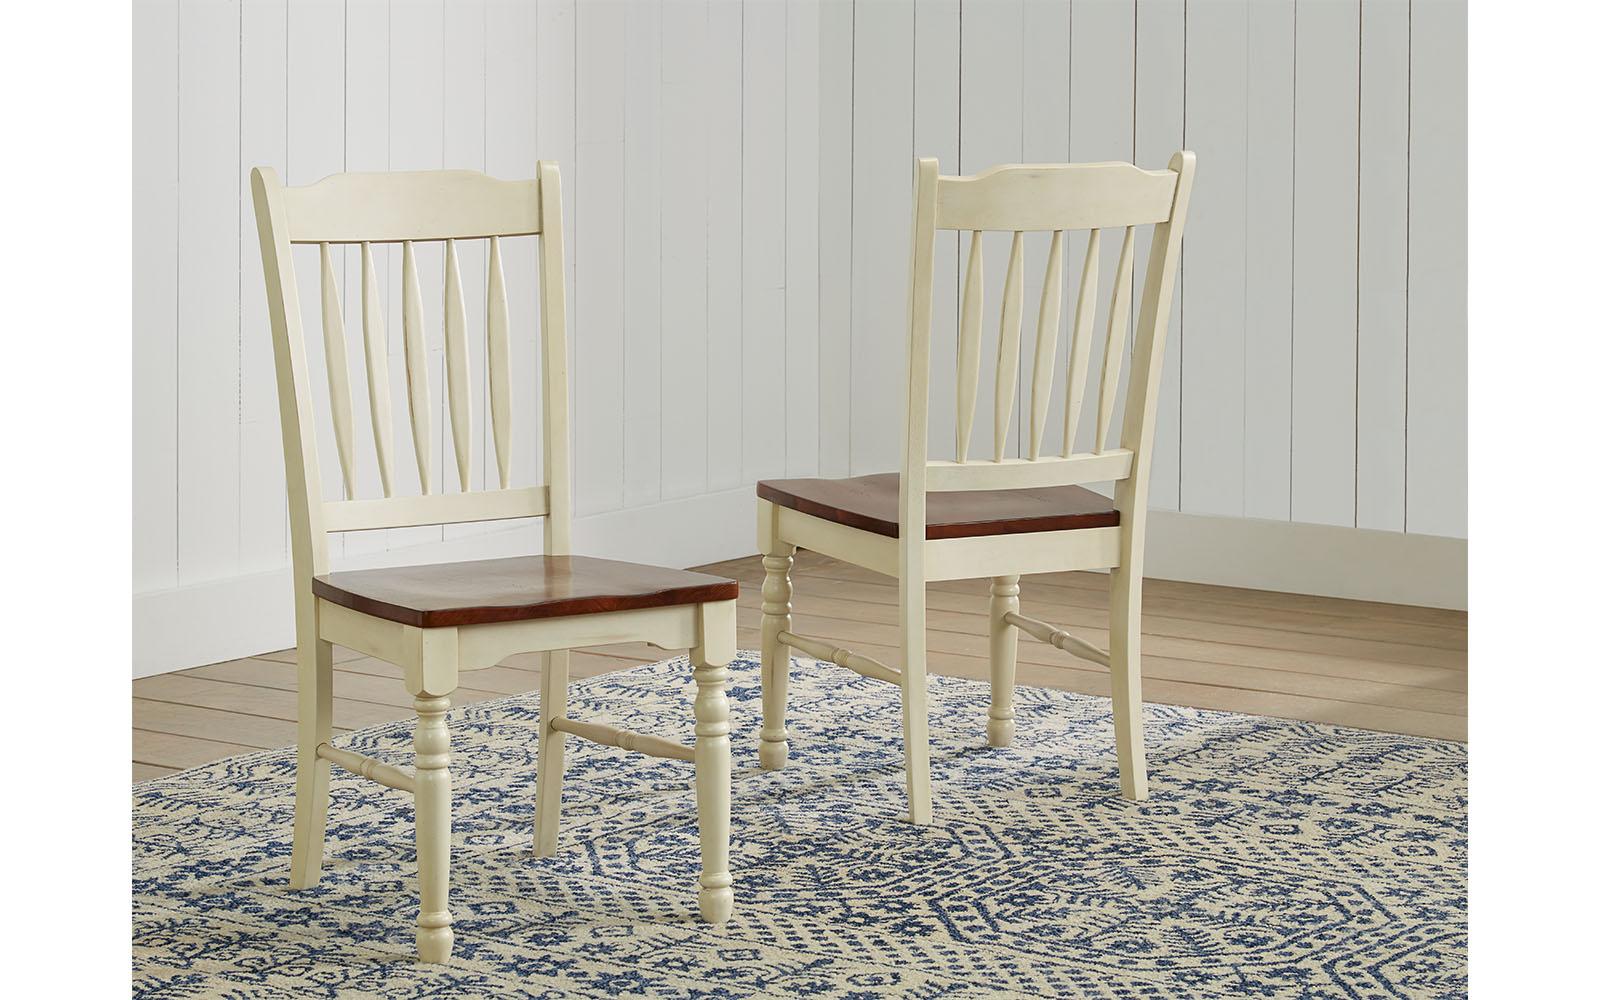 Rustic Dining Side Chair British Isles MB BRIMB267K-Set-2 in Brown, White 